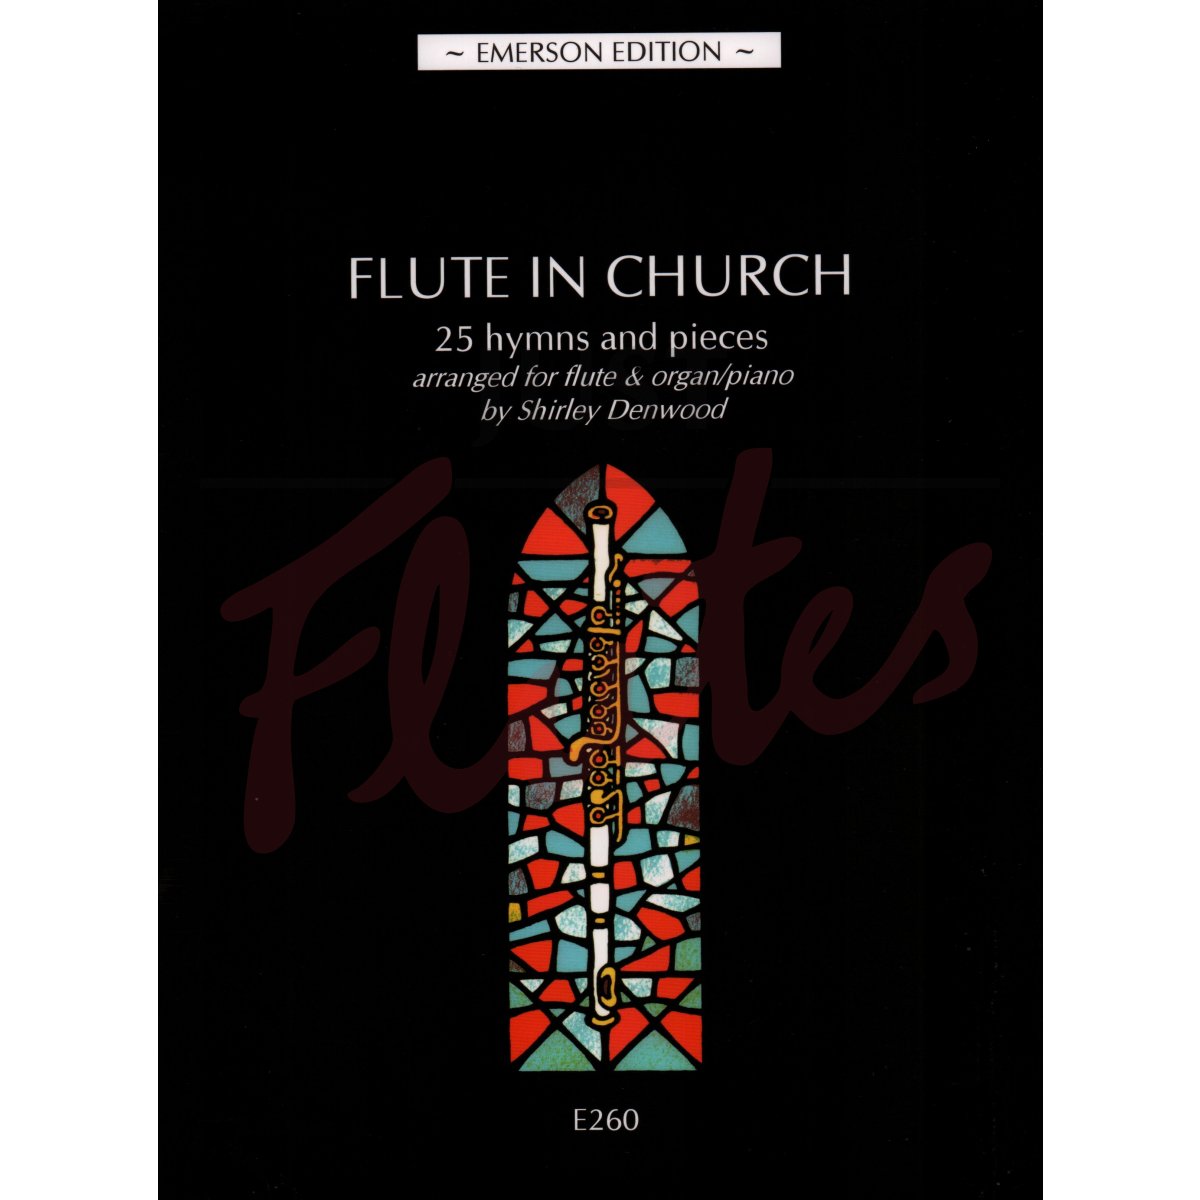 Flute in Church for Flute and Organ/Piano